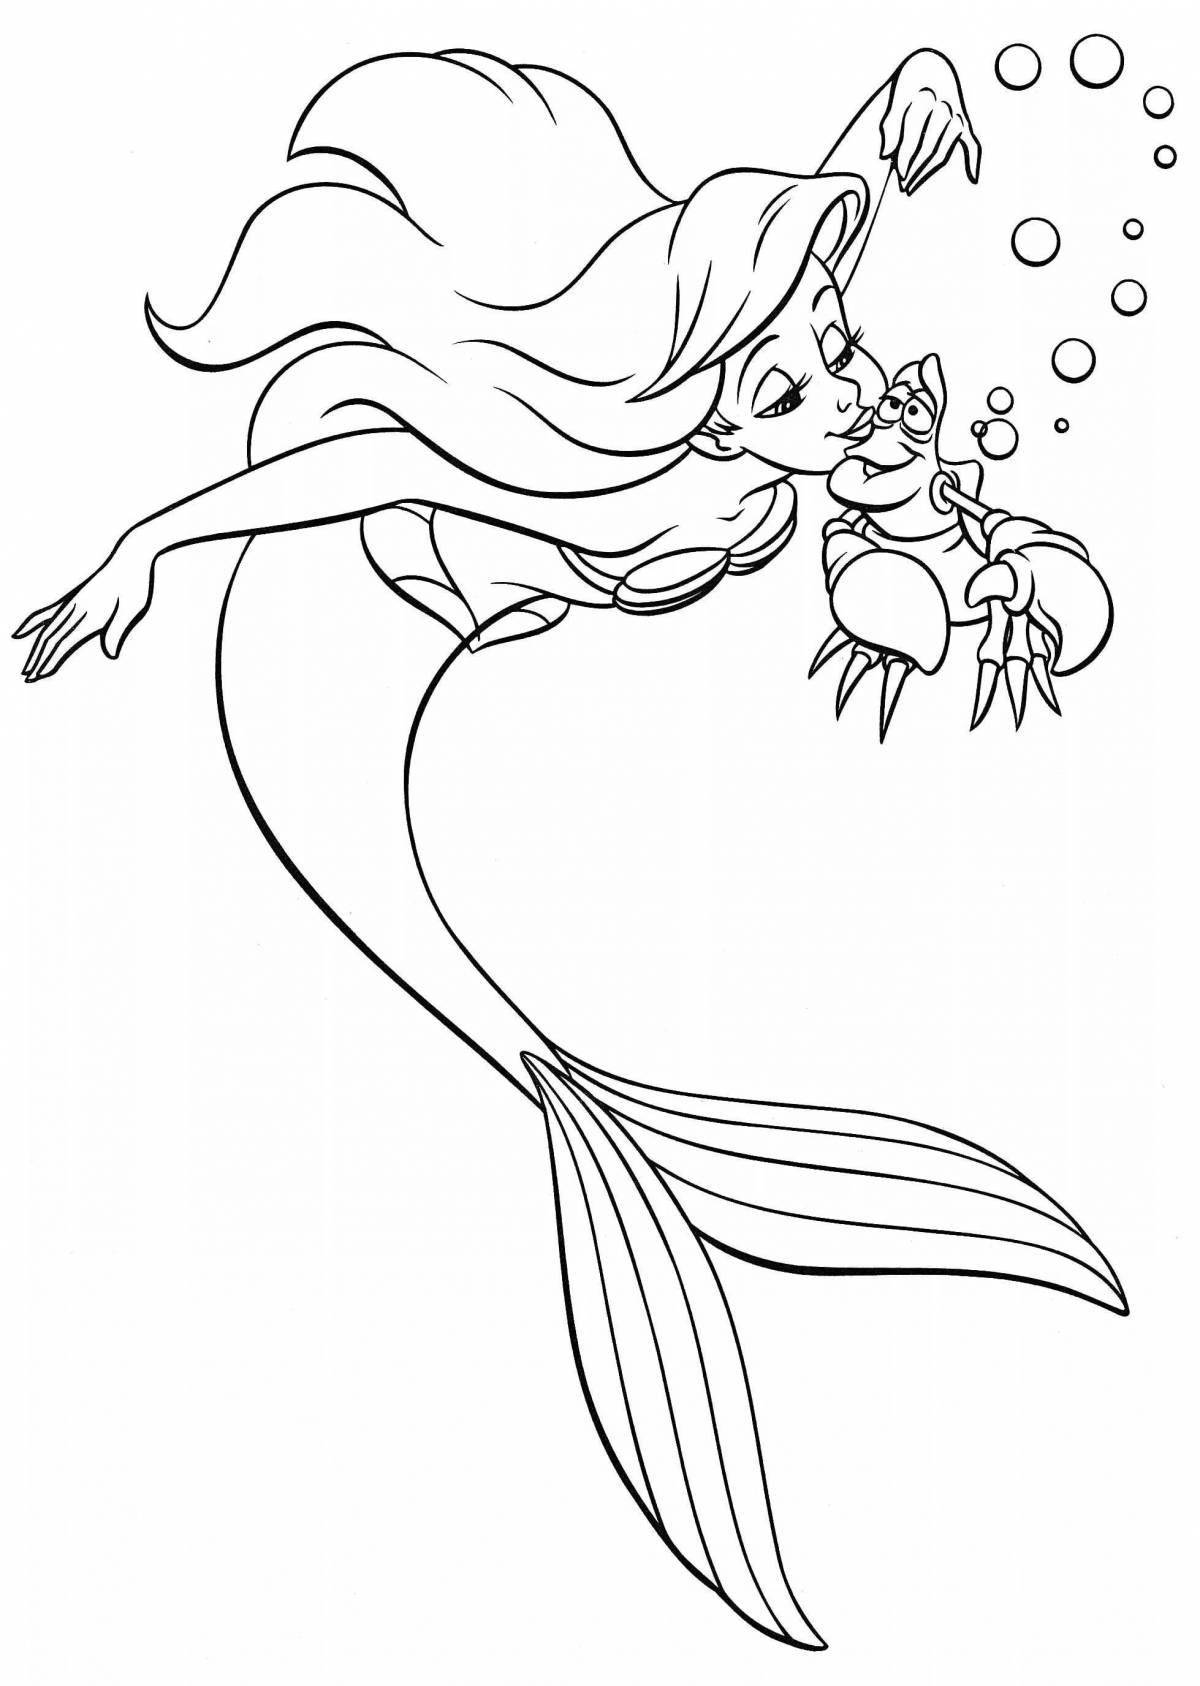 Playful coloring ariel the little mermaid for kids